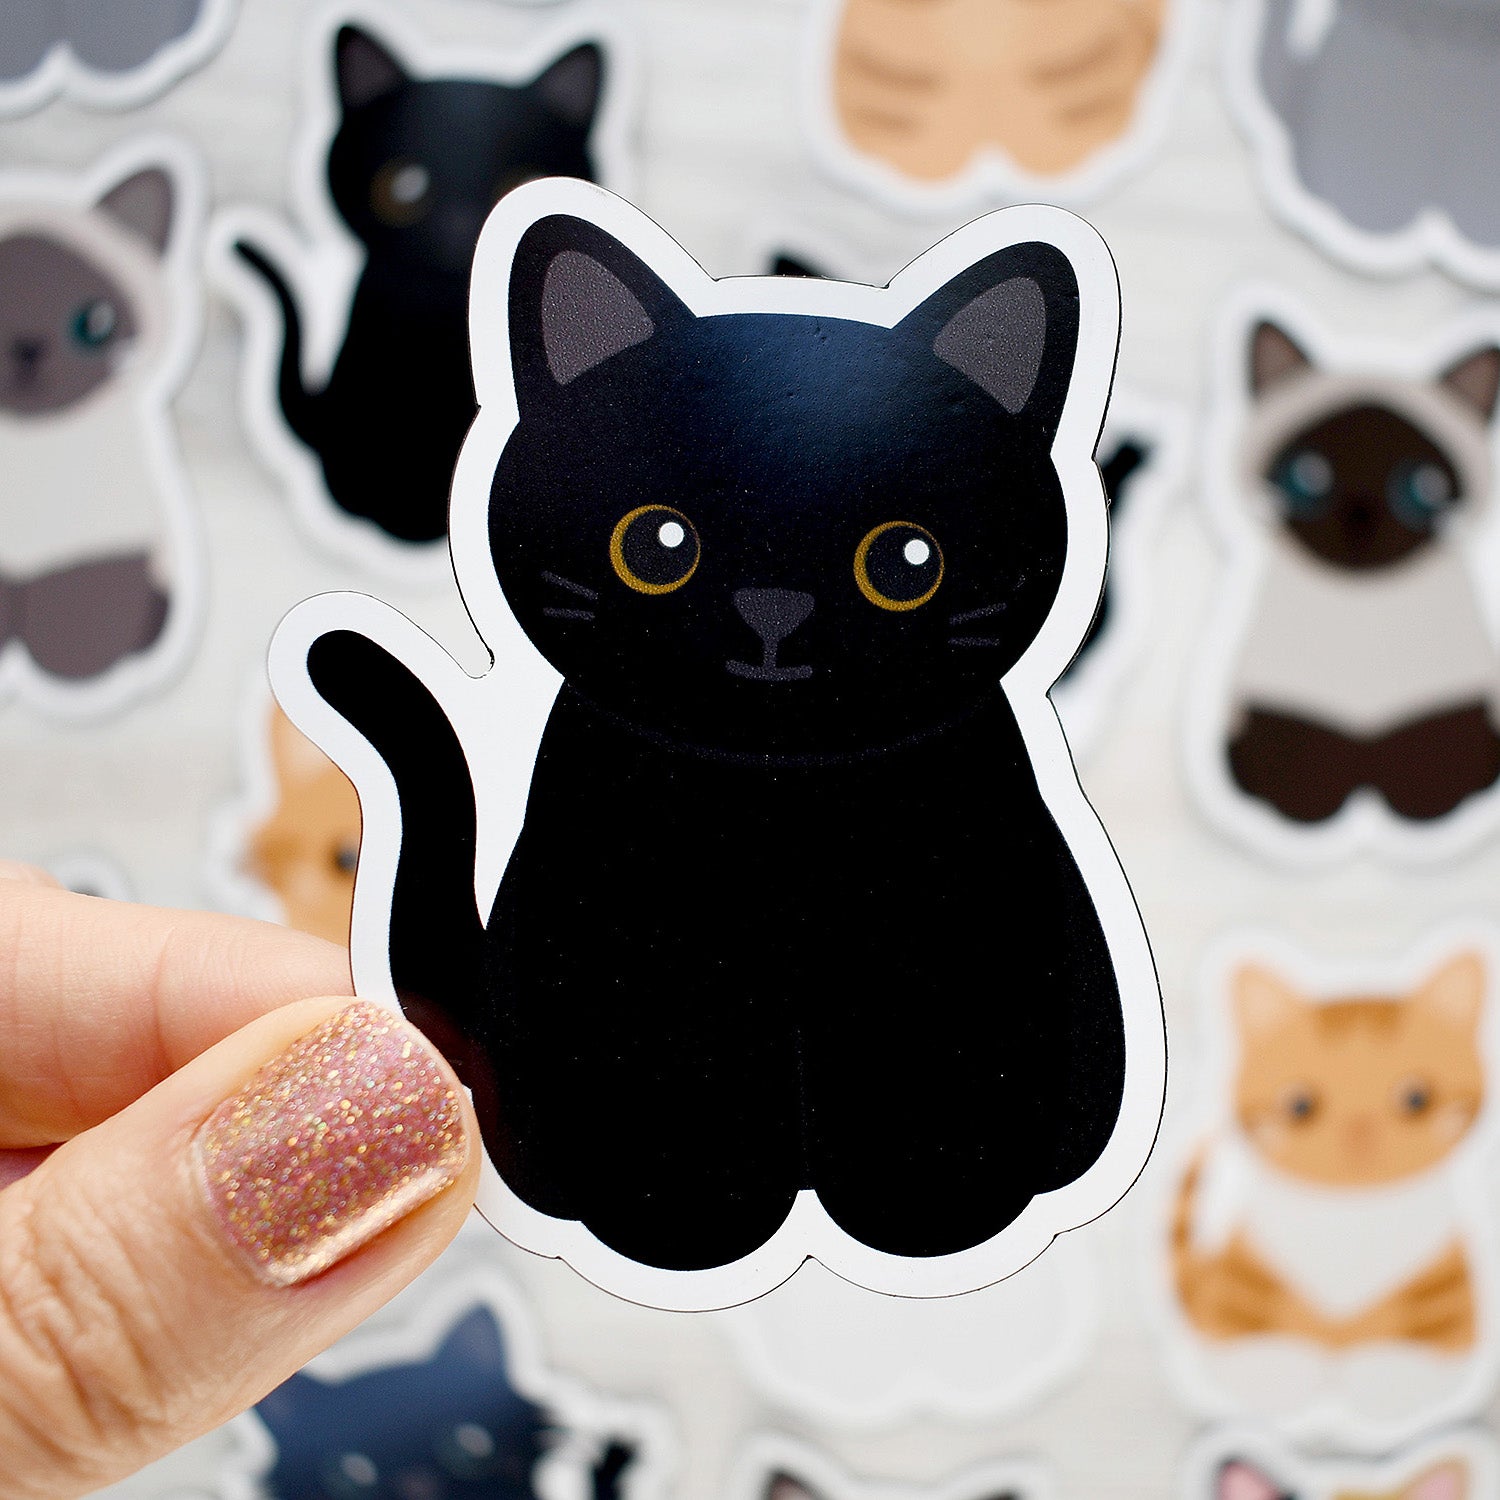 Looks Like My Cat! Black cat with amber eyes magnet